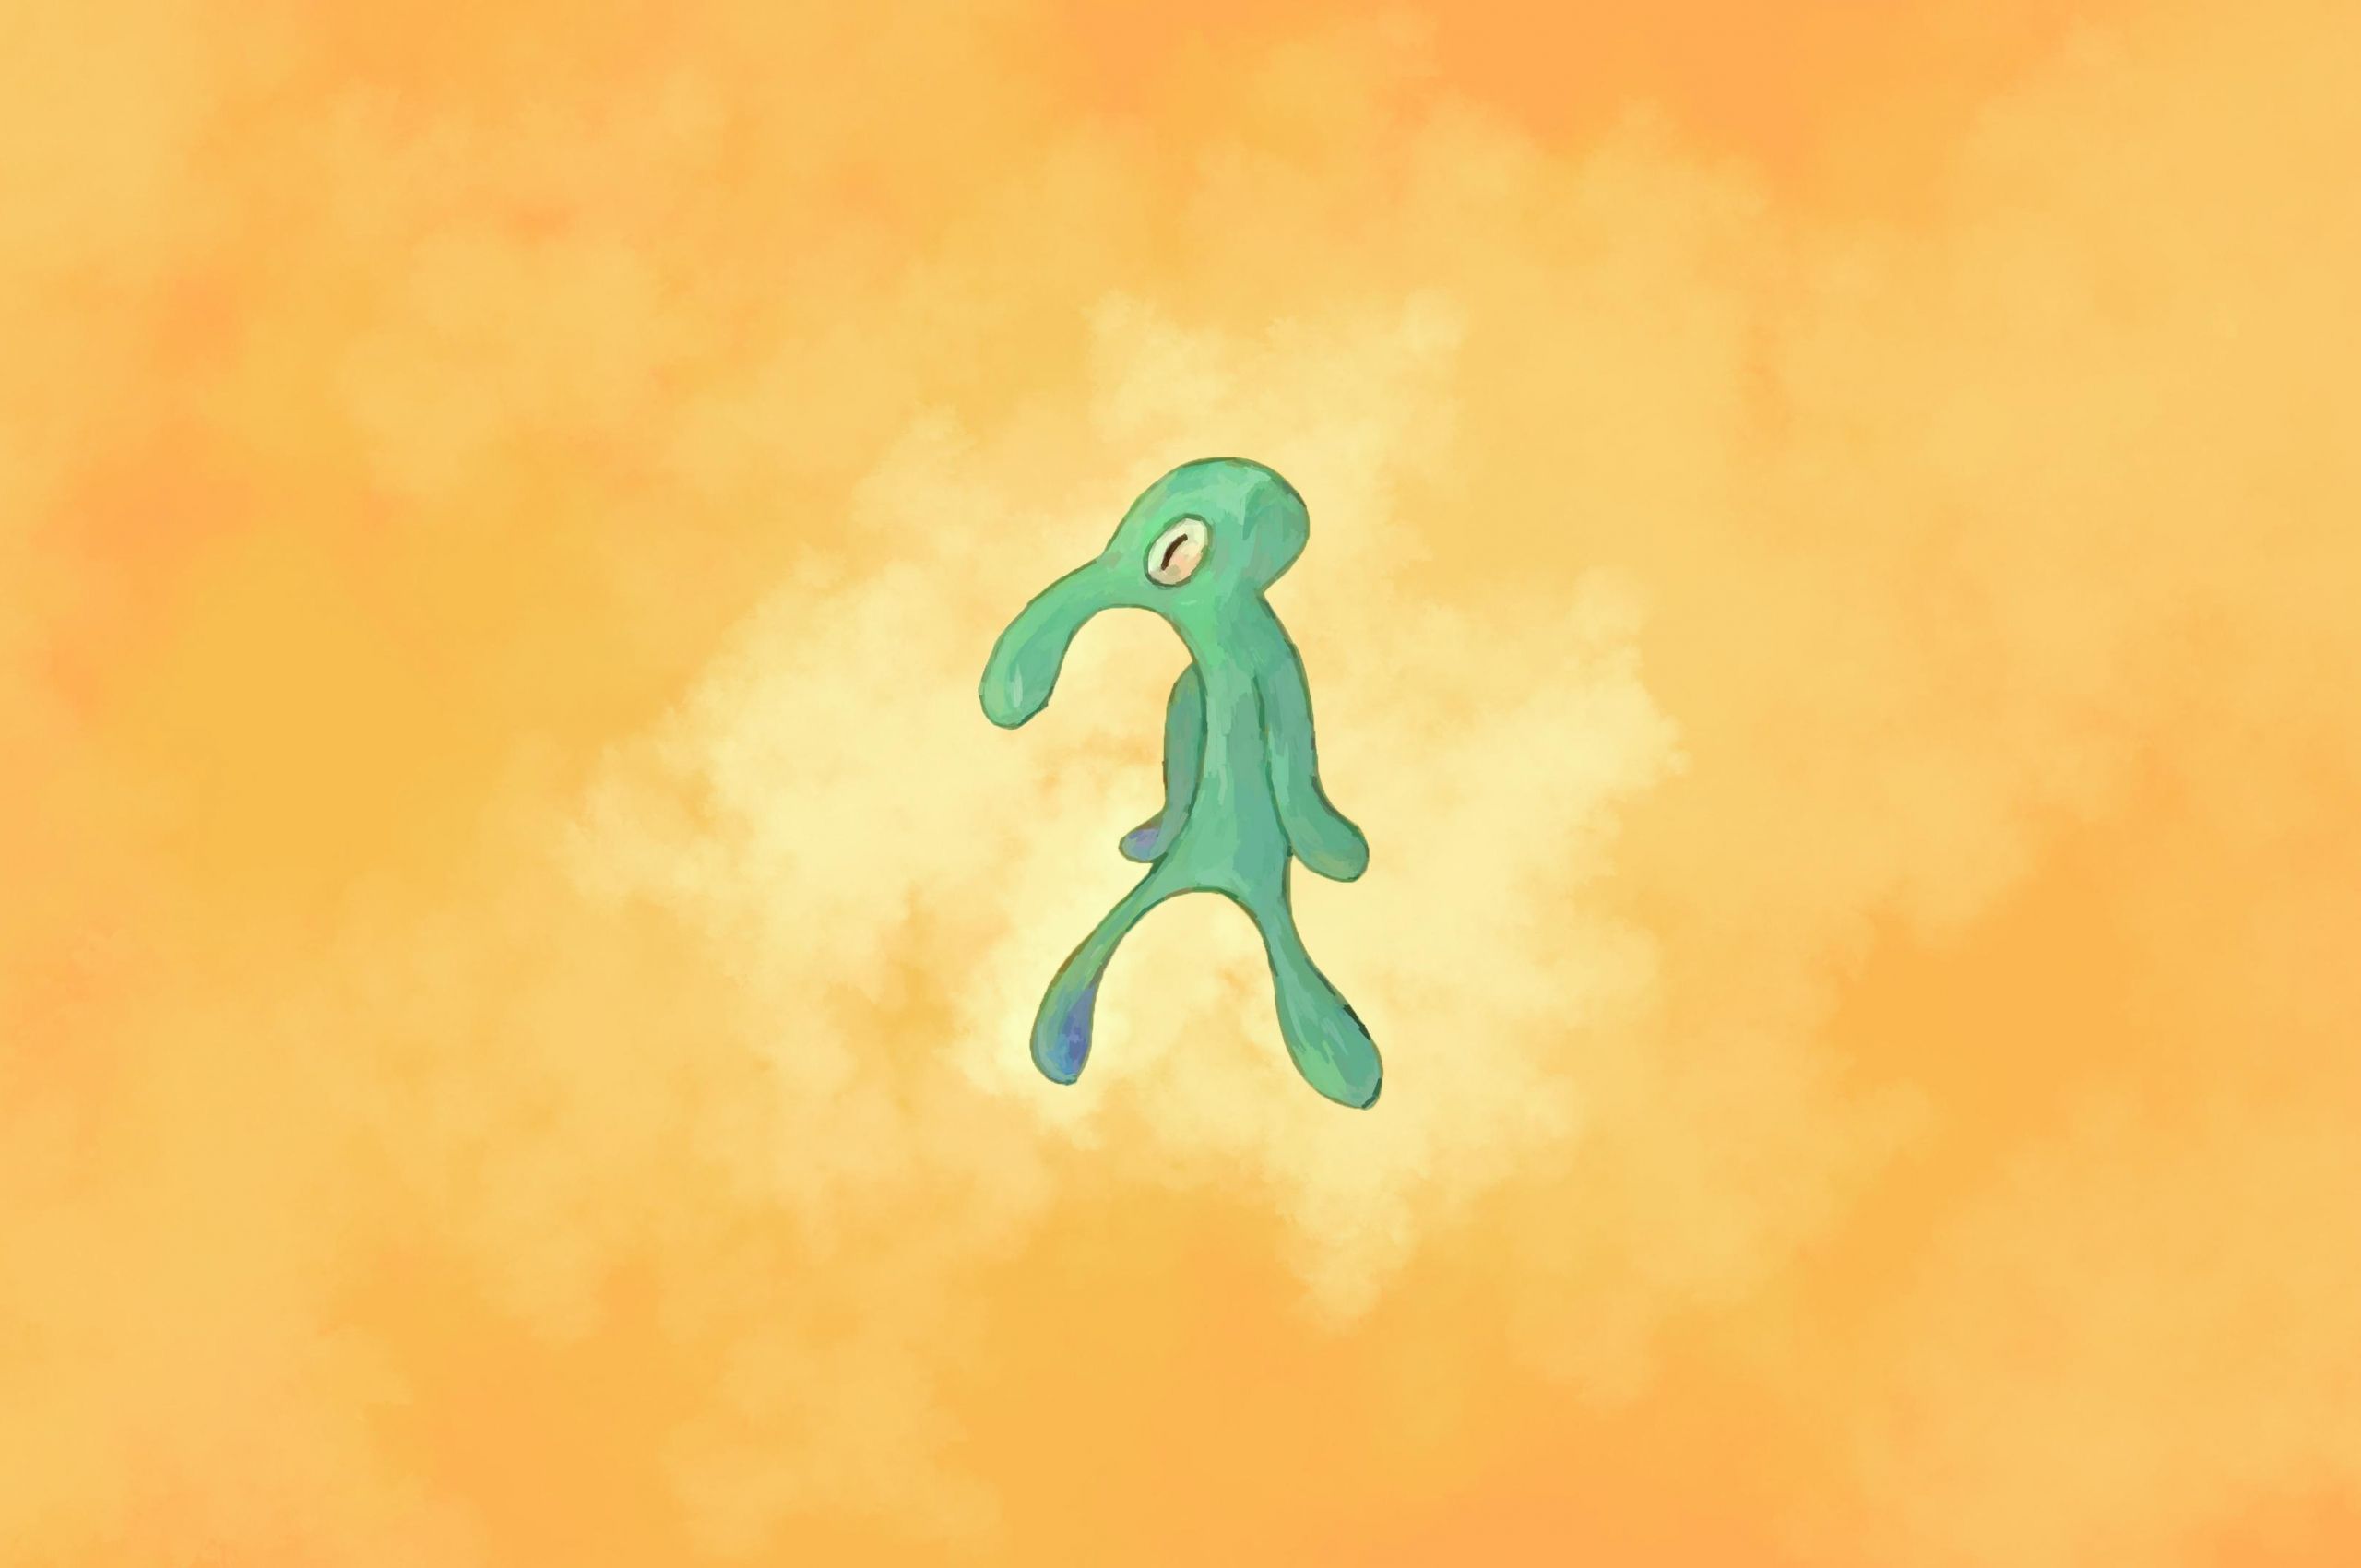 Free download Bold and Brash 4K Wallpaper rBikiniBottomTwitter